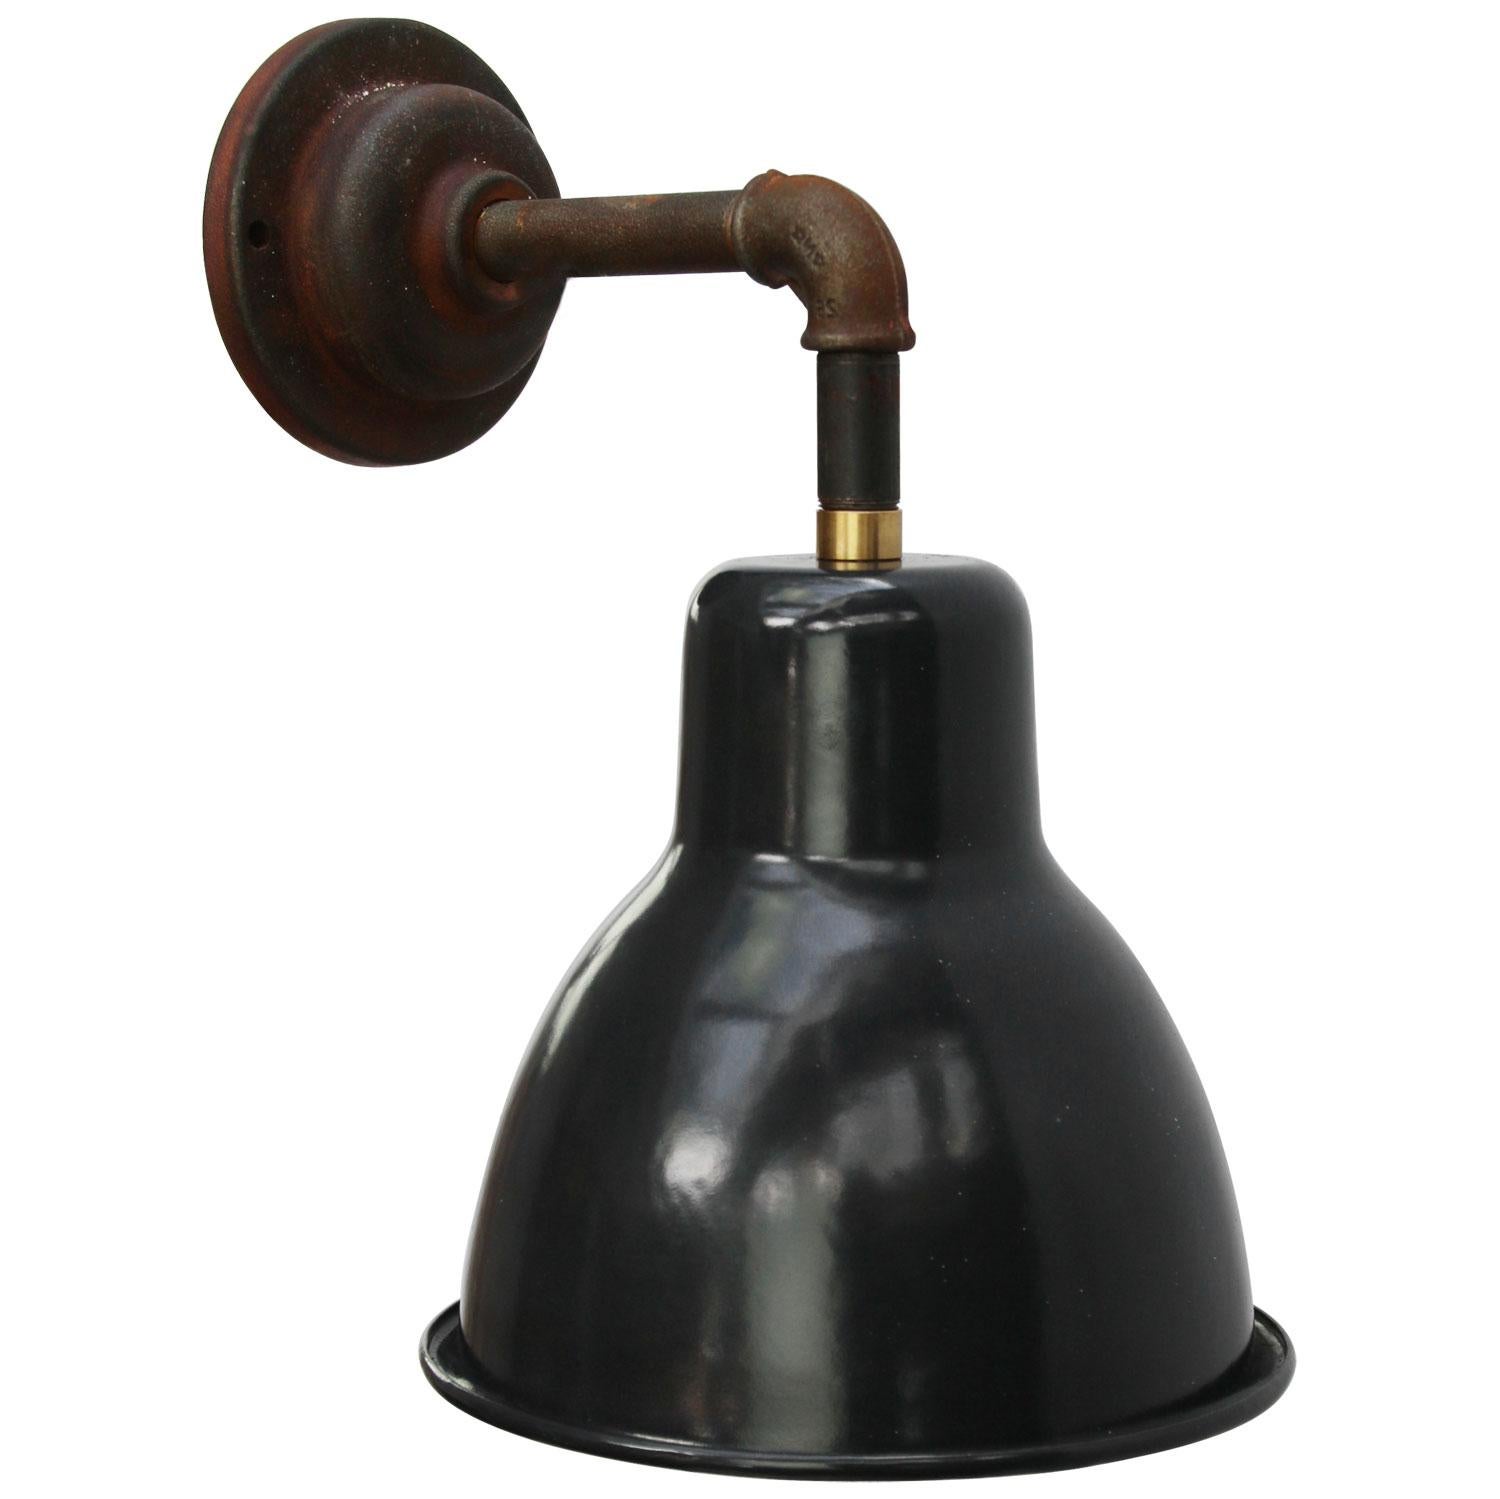 Factory wall light.
Black enamel shade, cast iron arm and wall plate

Diameter cast iron wall piece: 10 cm, 2 holes to secure

Weight: 1.80 kg / 4 lb

Priced per individual item. All lamps have been made suitable by international standards